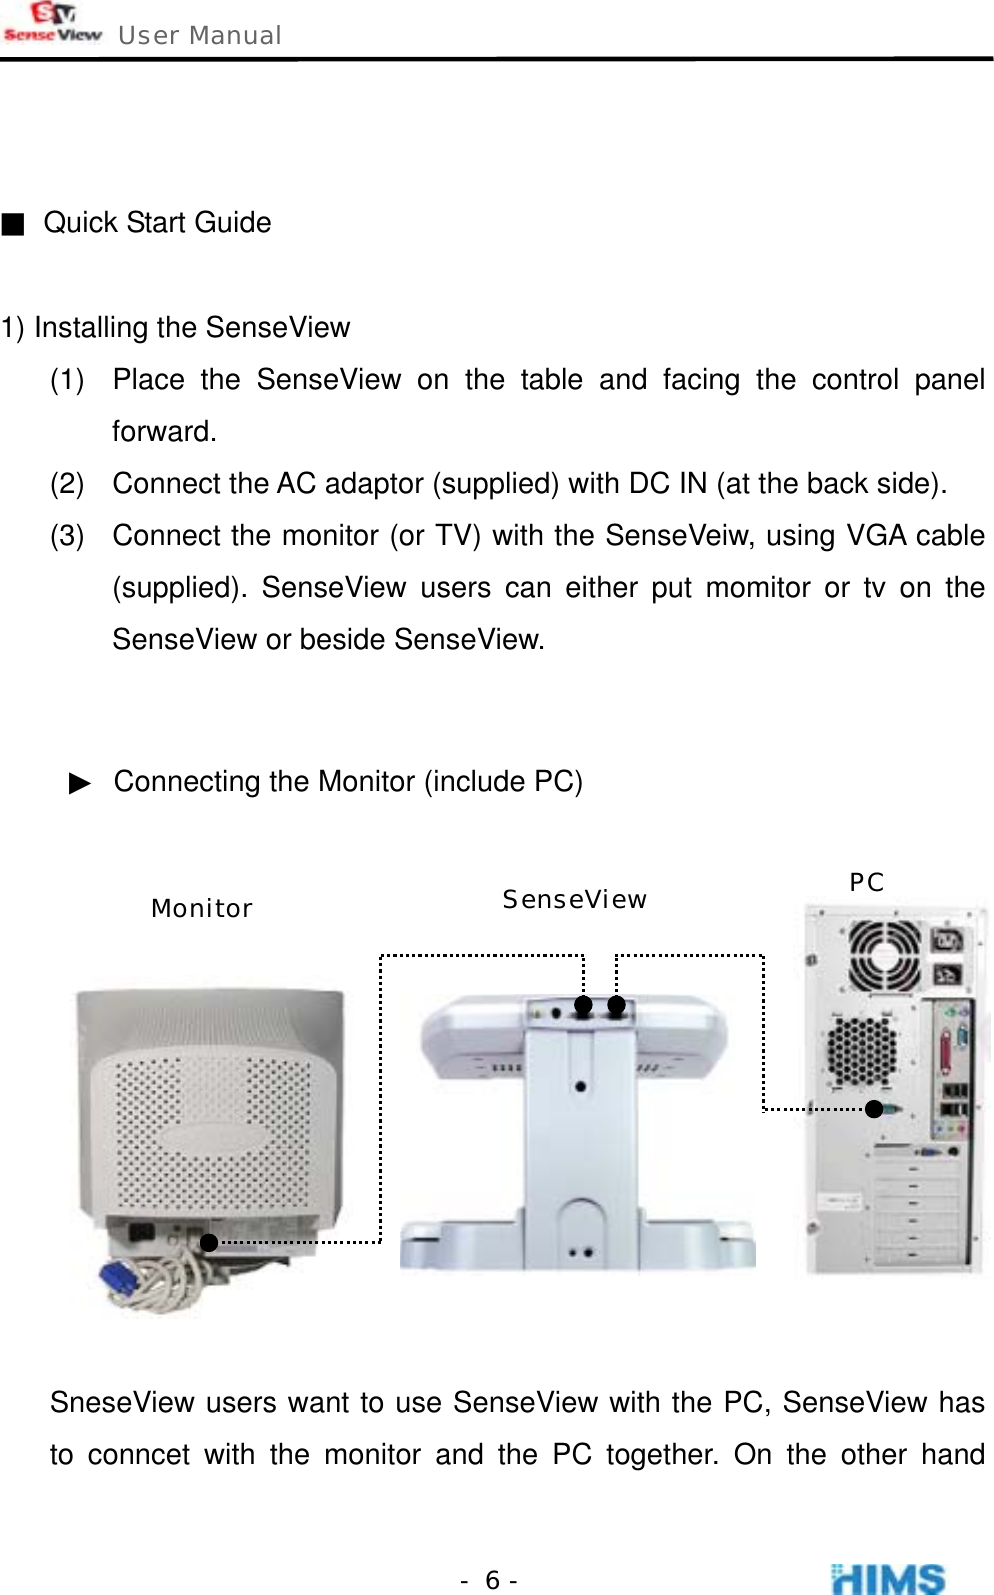  User Manual    - 6 -   ■  Quick Start Guide  1) Installing the SenseView (1)  Place the SenseView on the table and facing the control panel forward. (2)  Connect the AC adaptor (supplied) with DC IN (at the back side). (3)  Connect the monitor (or TV) with the SenseVeiw, using VGA cable (supplied). SenseView users can either put momitor or tv on the SenseView or beside SenseView.   ▶  Connecting the Monitor (include PC)   SneseView users want to use SenseView with the PC, SenseView has to conncet with the monitor and the PC together. On the other hand Monitor  SenseView PC 